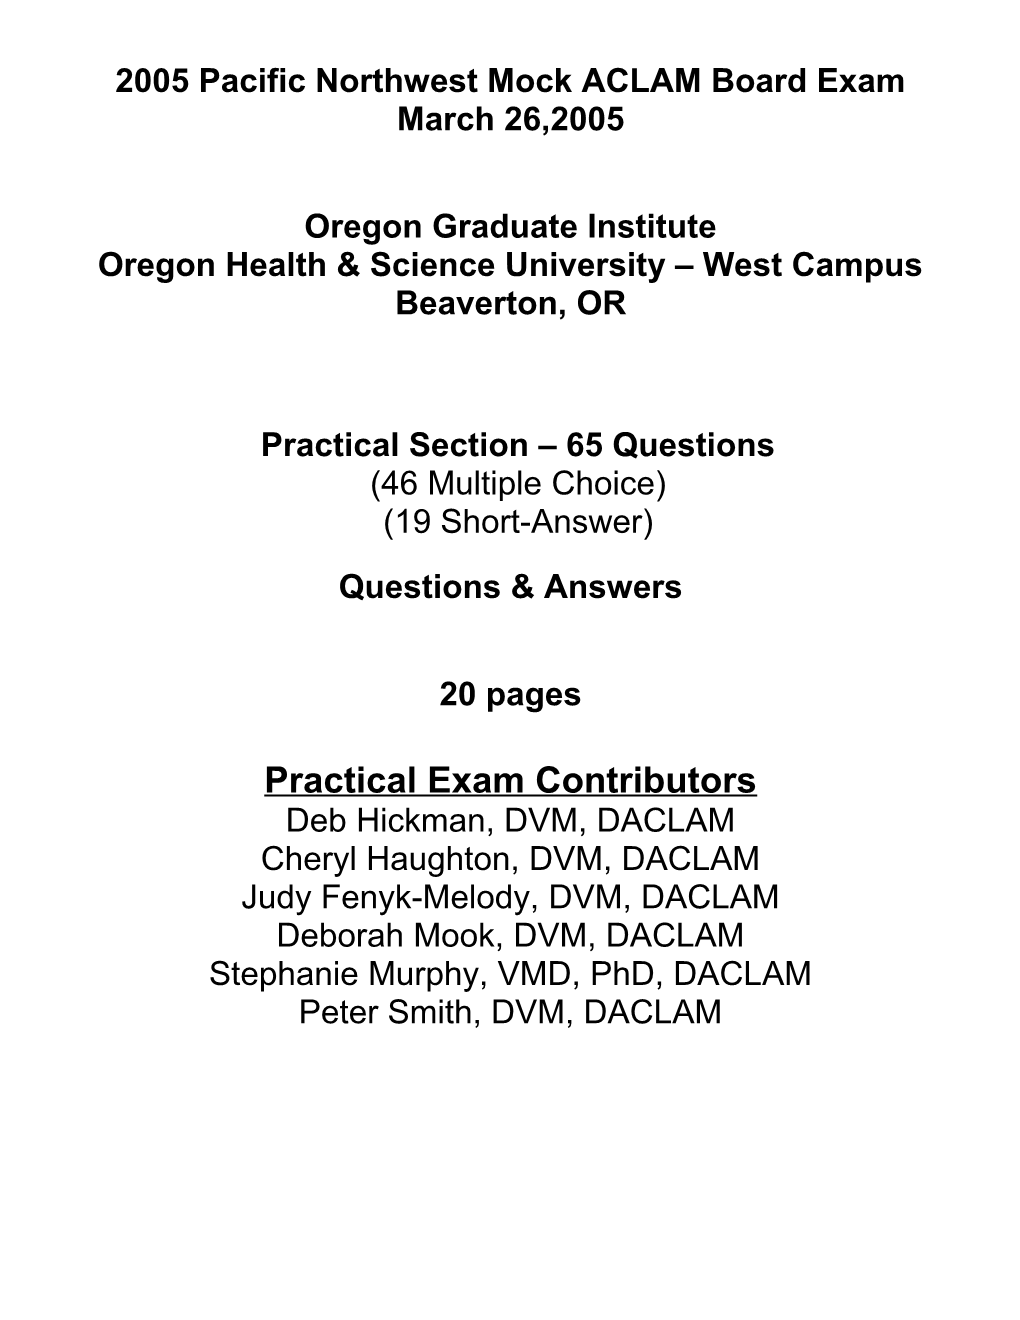 Pacific Northwest Mock ACLAM Practical